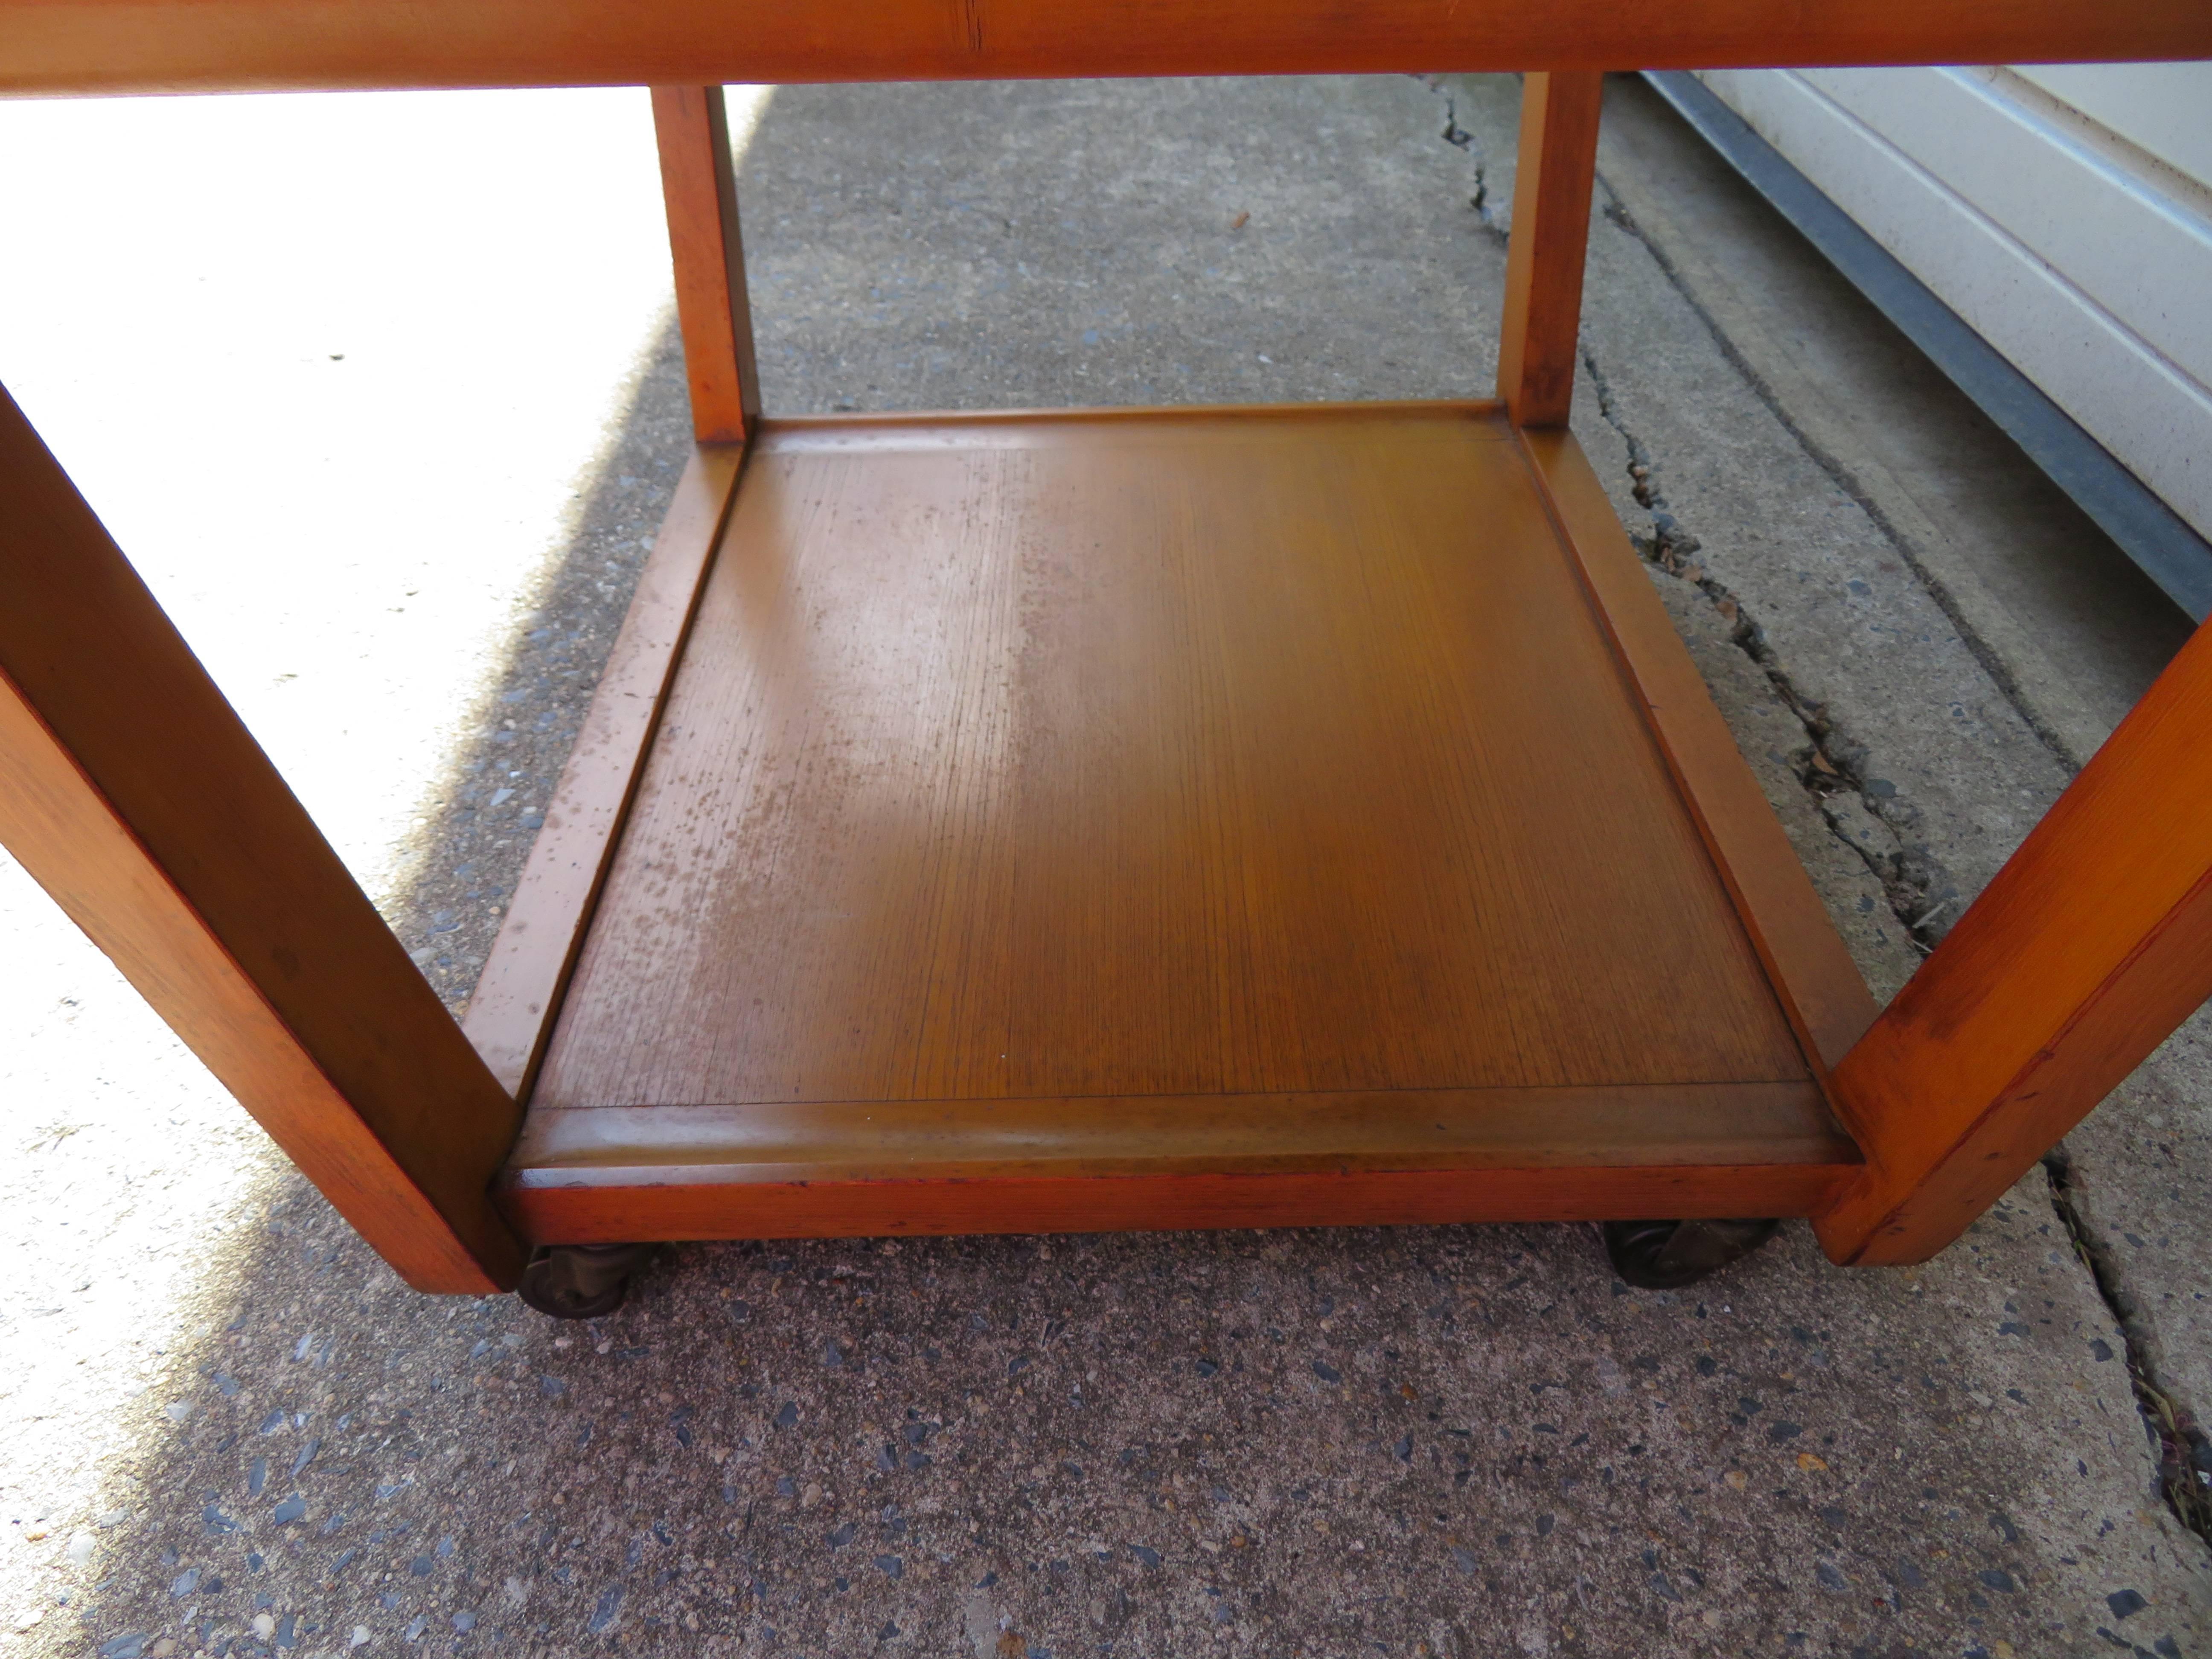 Handsome Edward Wormley Precedent Collection Bar Cart, Mid-Century Modern In Good Condition For Sale In Pemberton, NJ